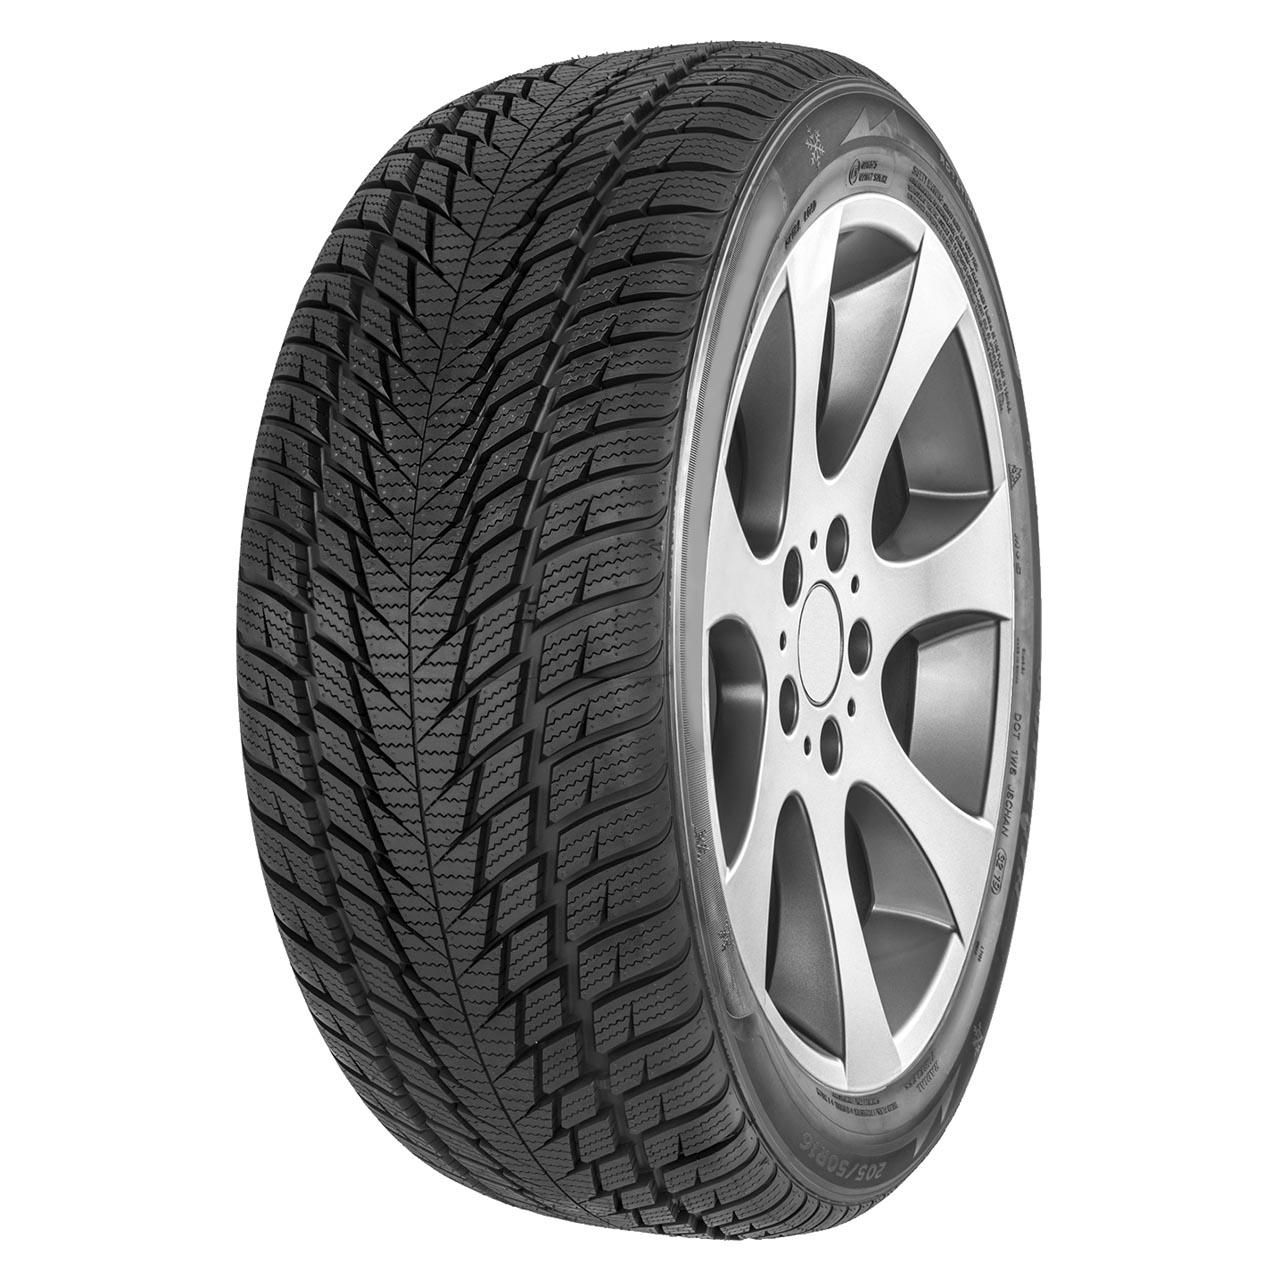 FORTUNA GOWIN UHP 2 XL 215/40 R17 87V  TL M+S 3PMSF